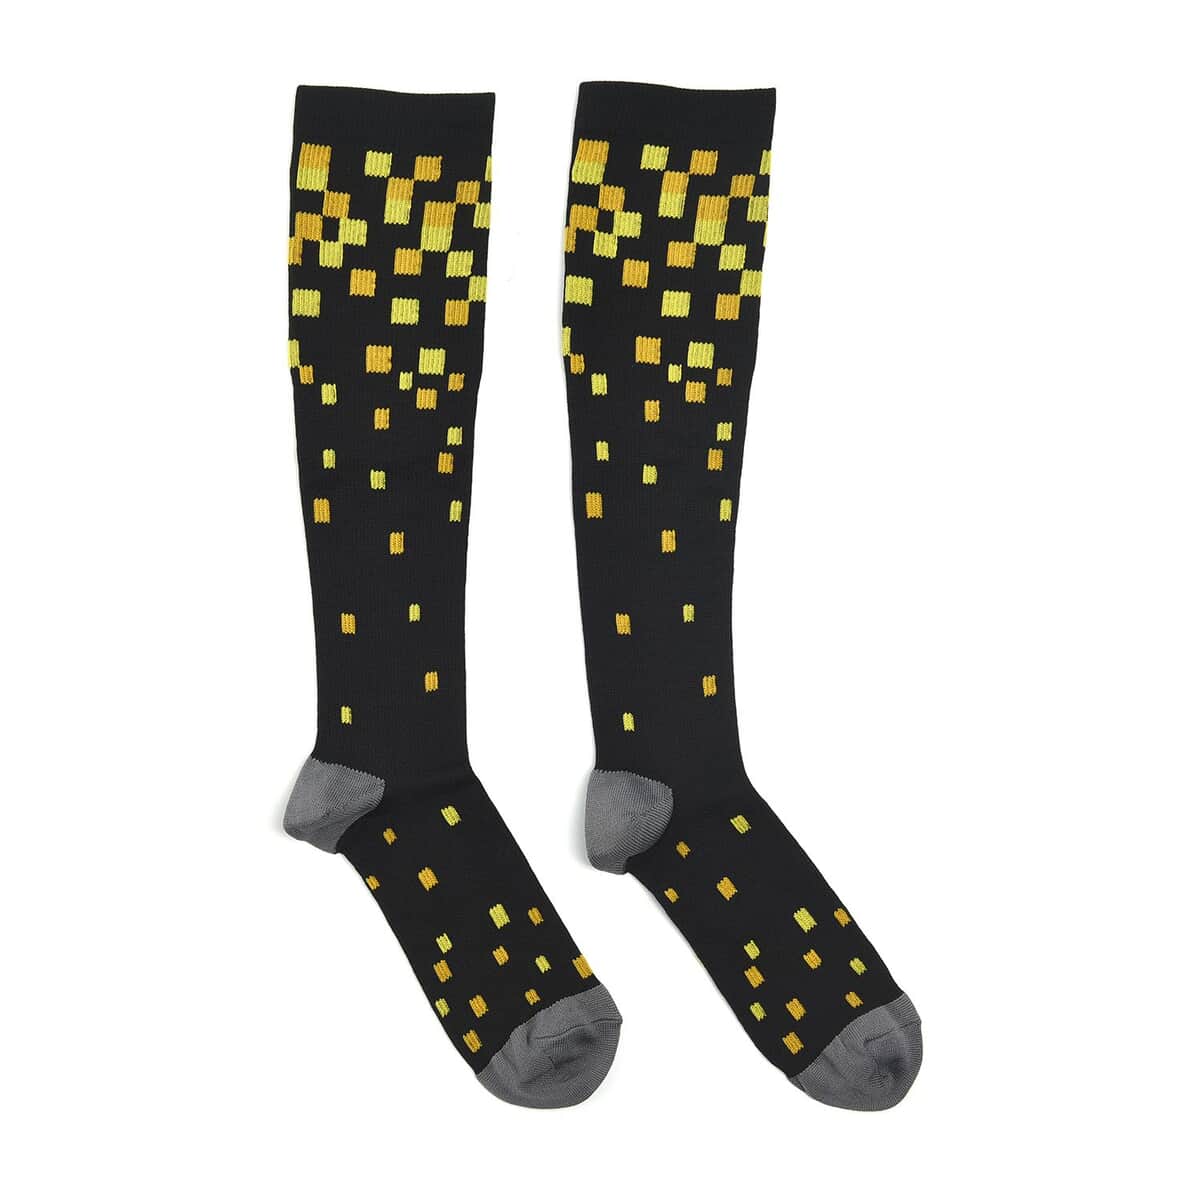 Set of 4 Pairs Knee Length Copper Infused Compression Socks - Multi Checker (S/M) image number 4